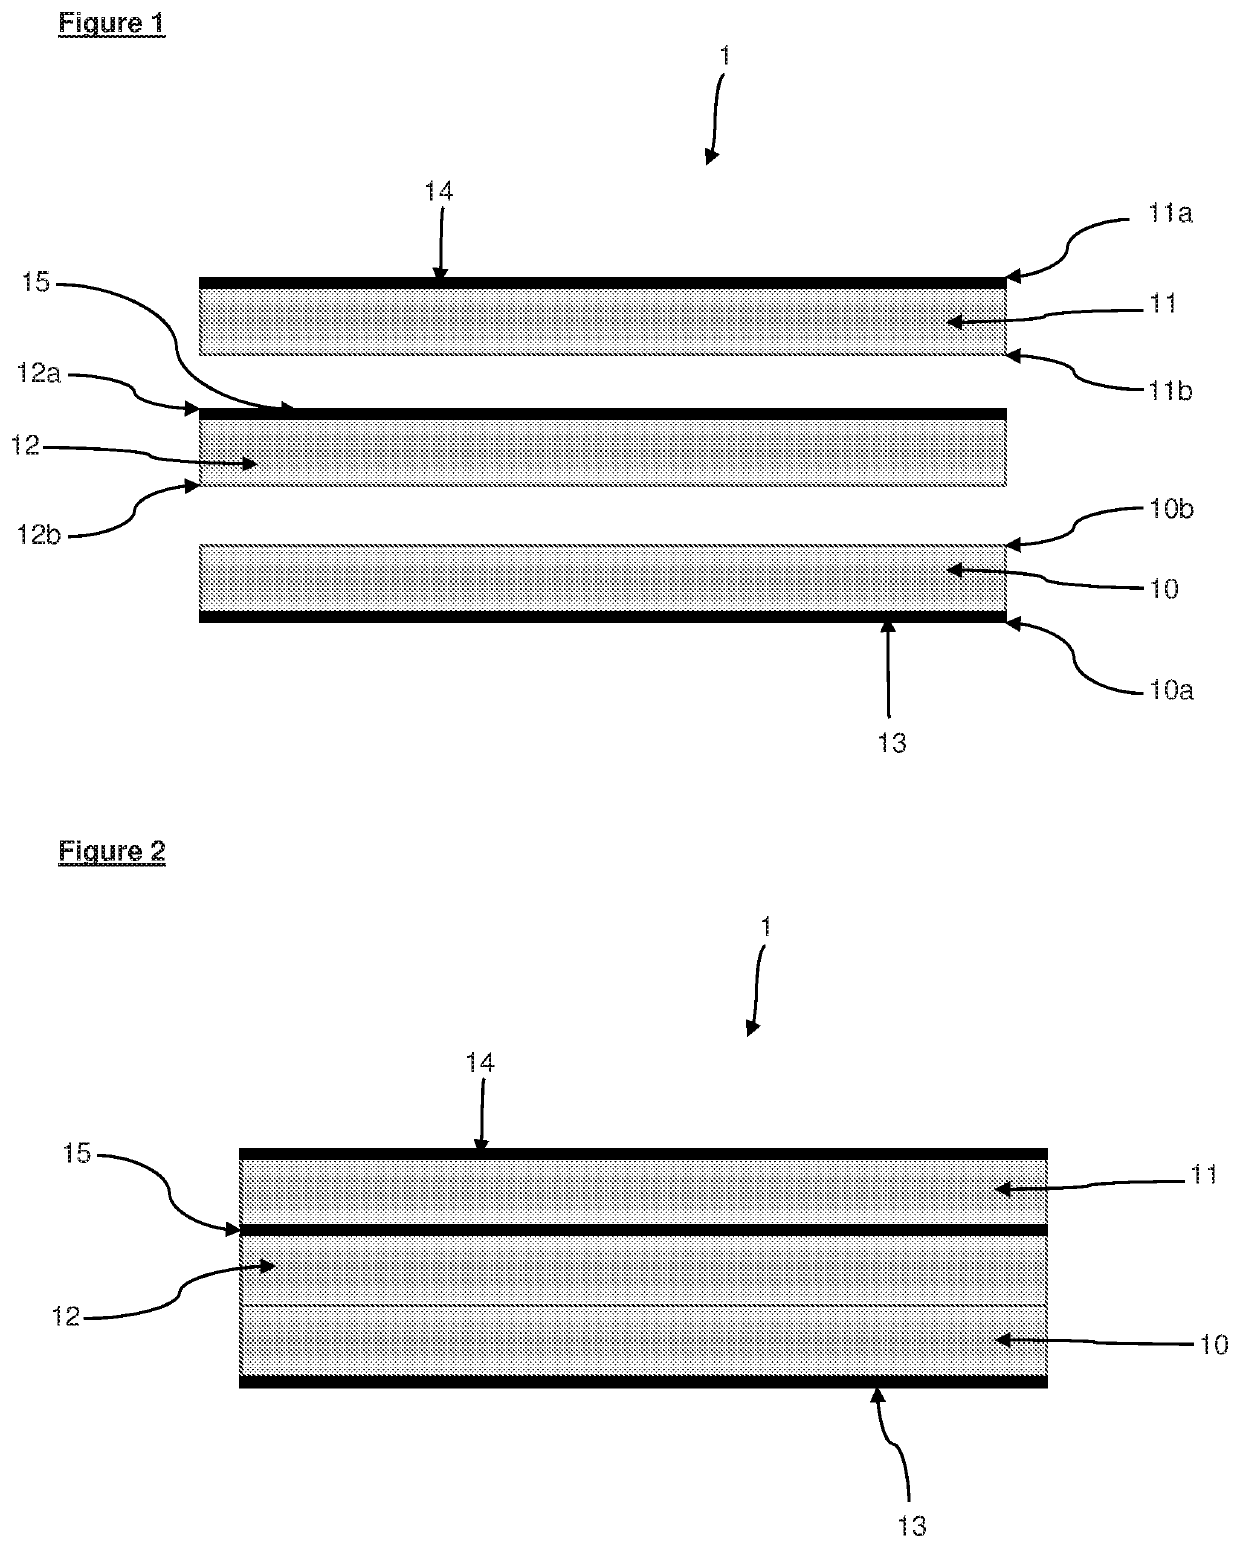 Catalyst-coated membrane having a laminate structure